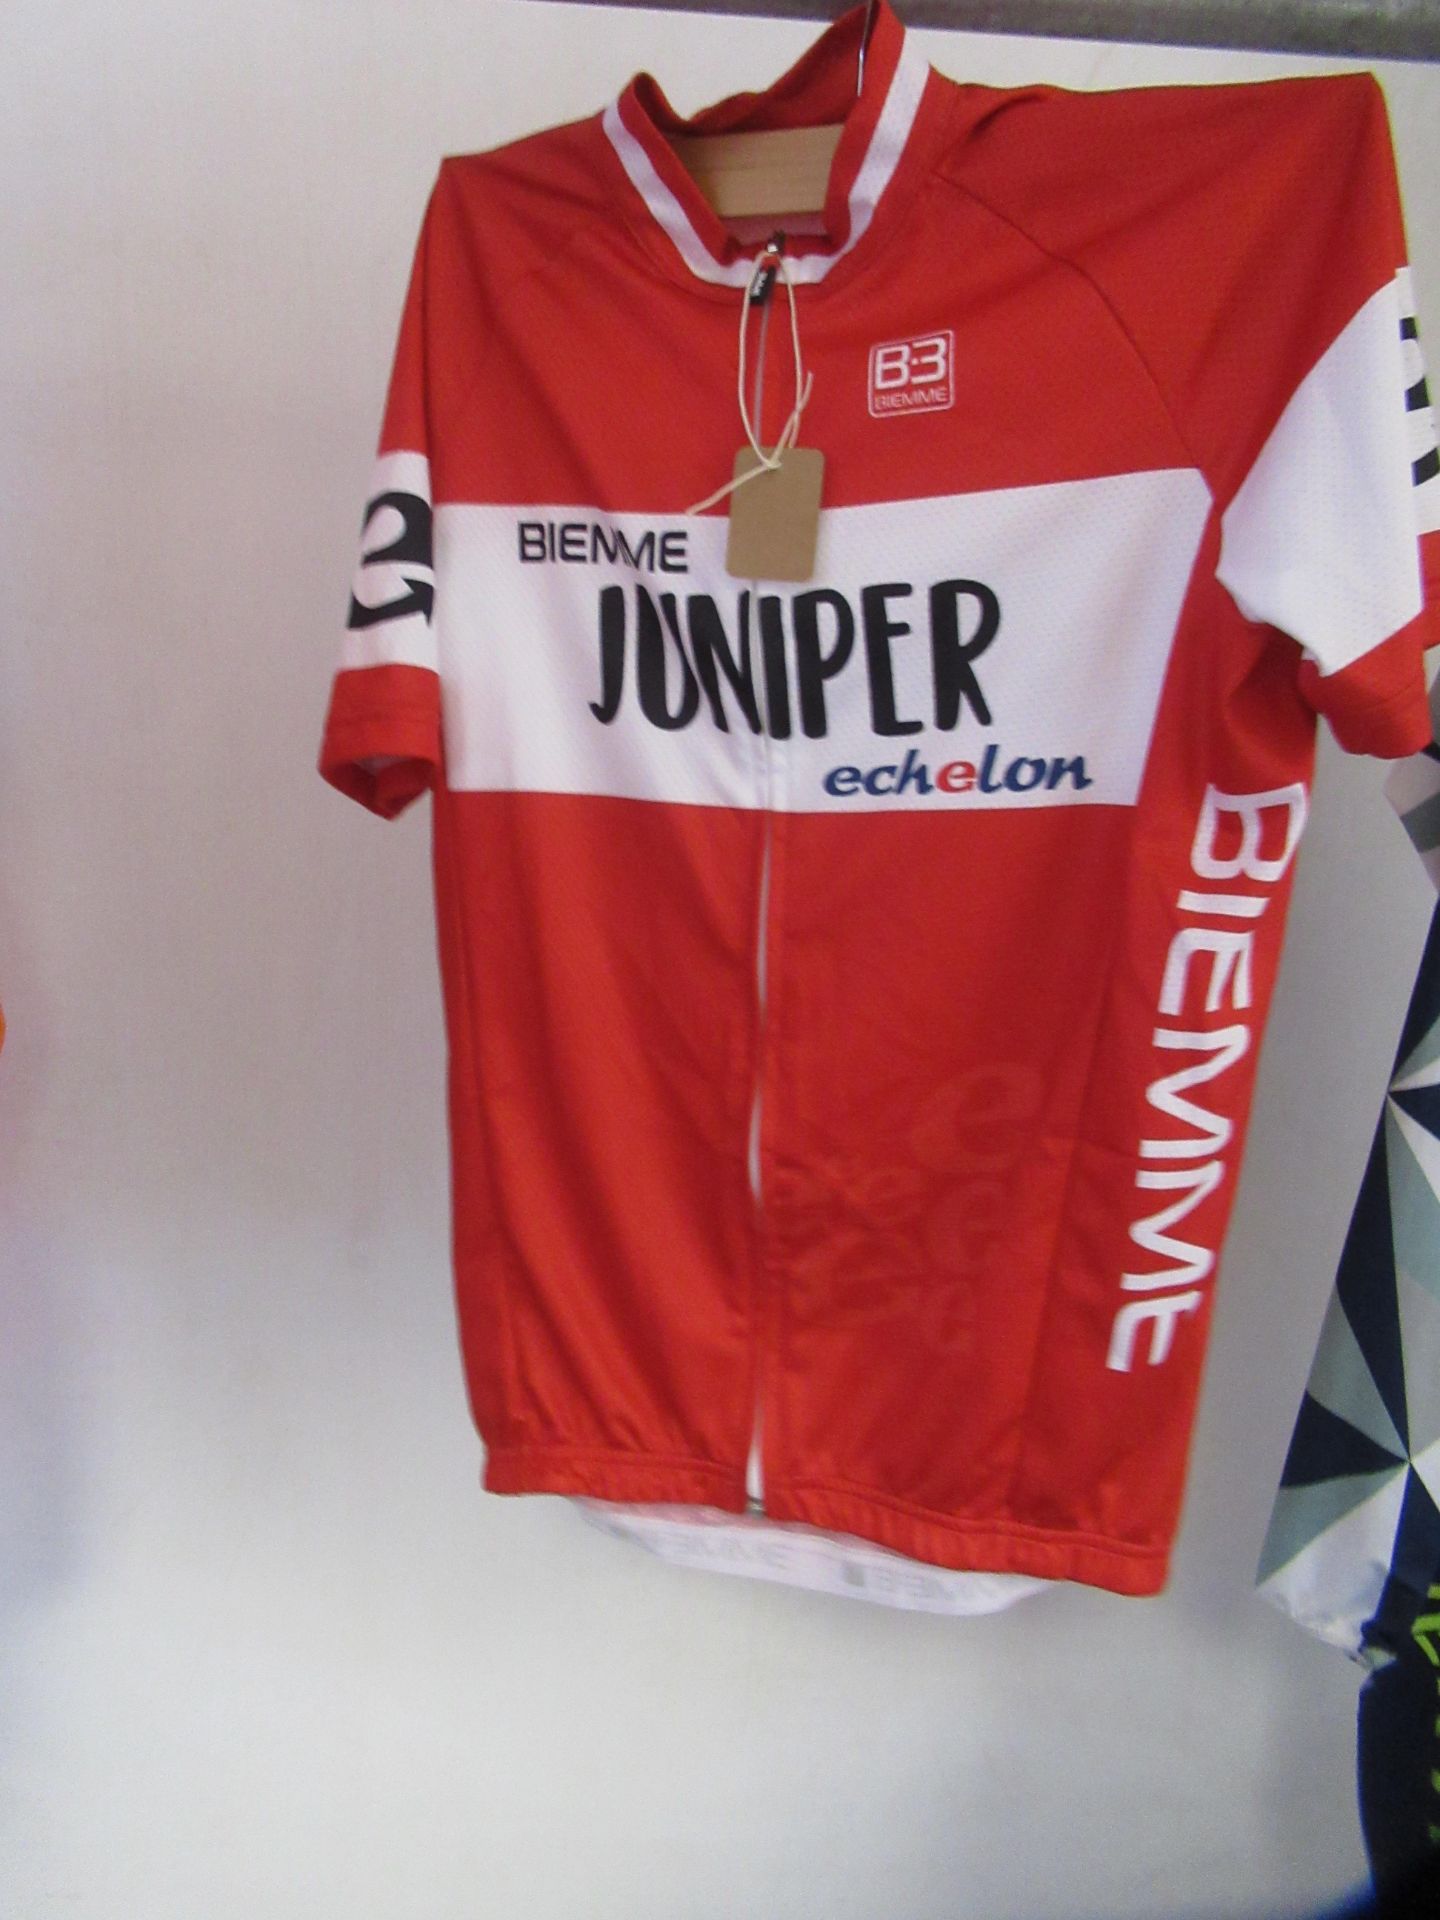 M Biemme Male Cycling Clothes - Image 7 of 8